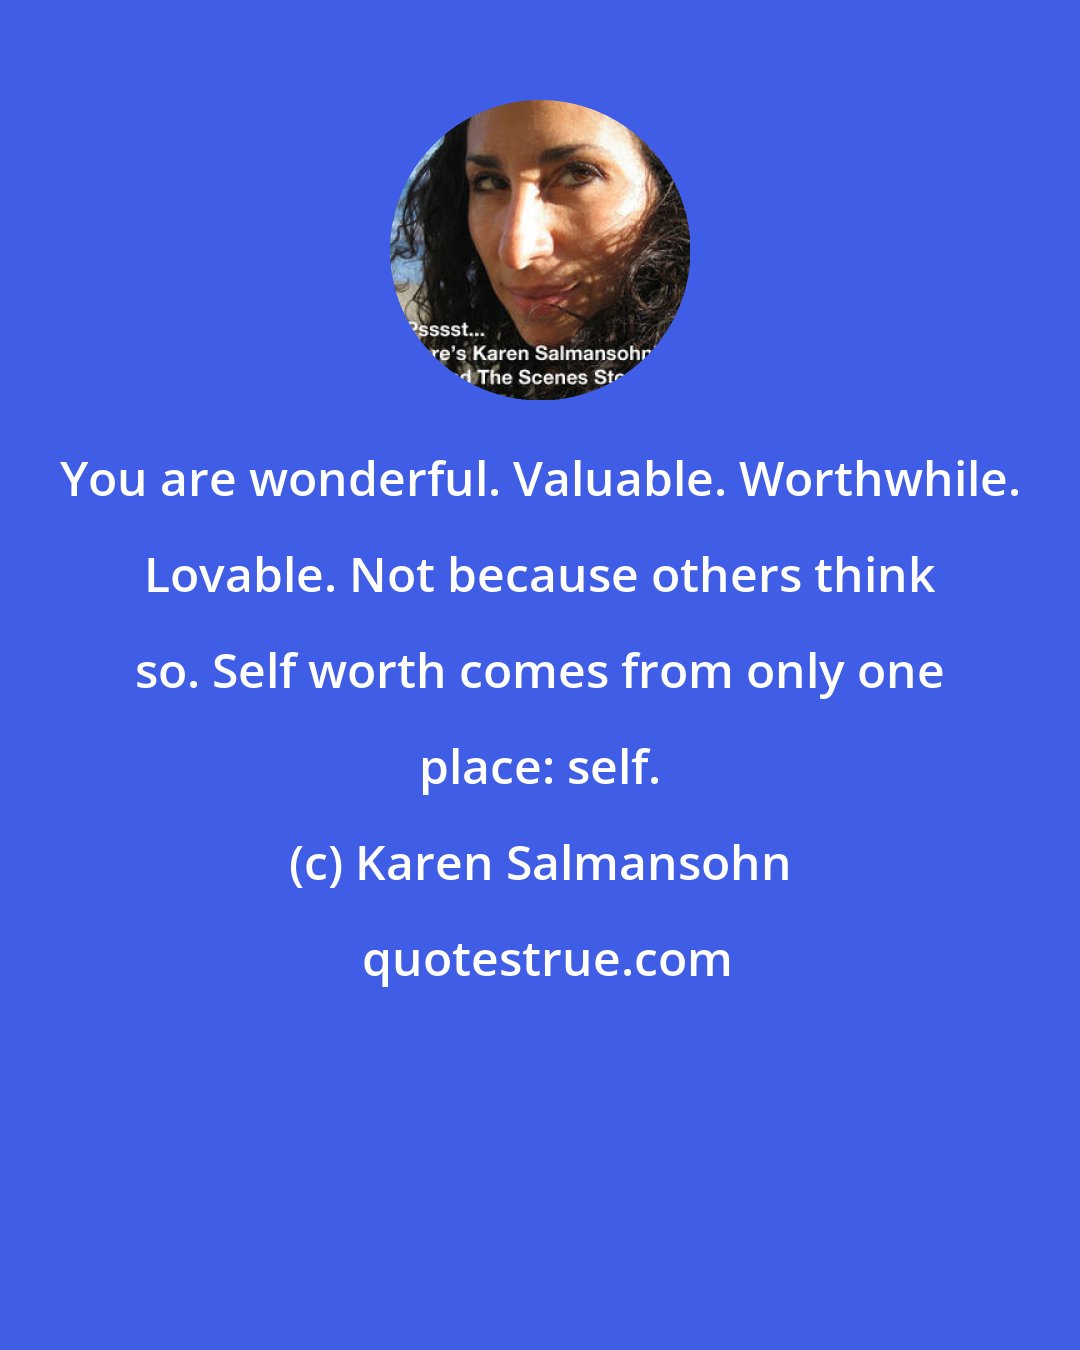 Karen Salmansohn: You are wonderful. Valuable. Worthwhile. Lovable. Not because others think so. Self worth comes from only one place: self.